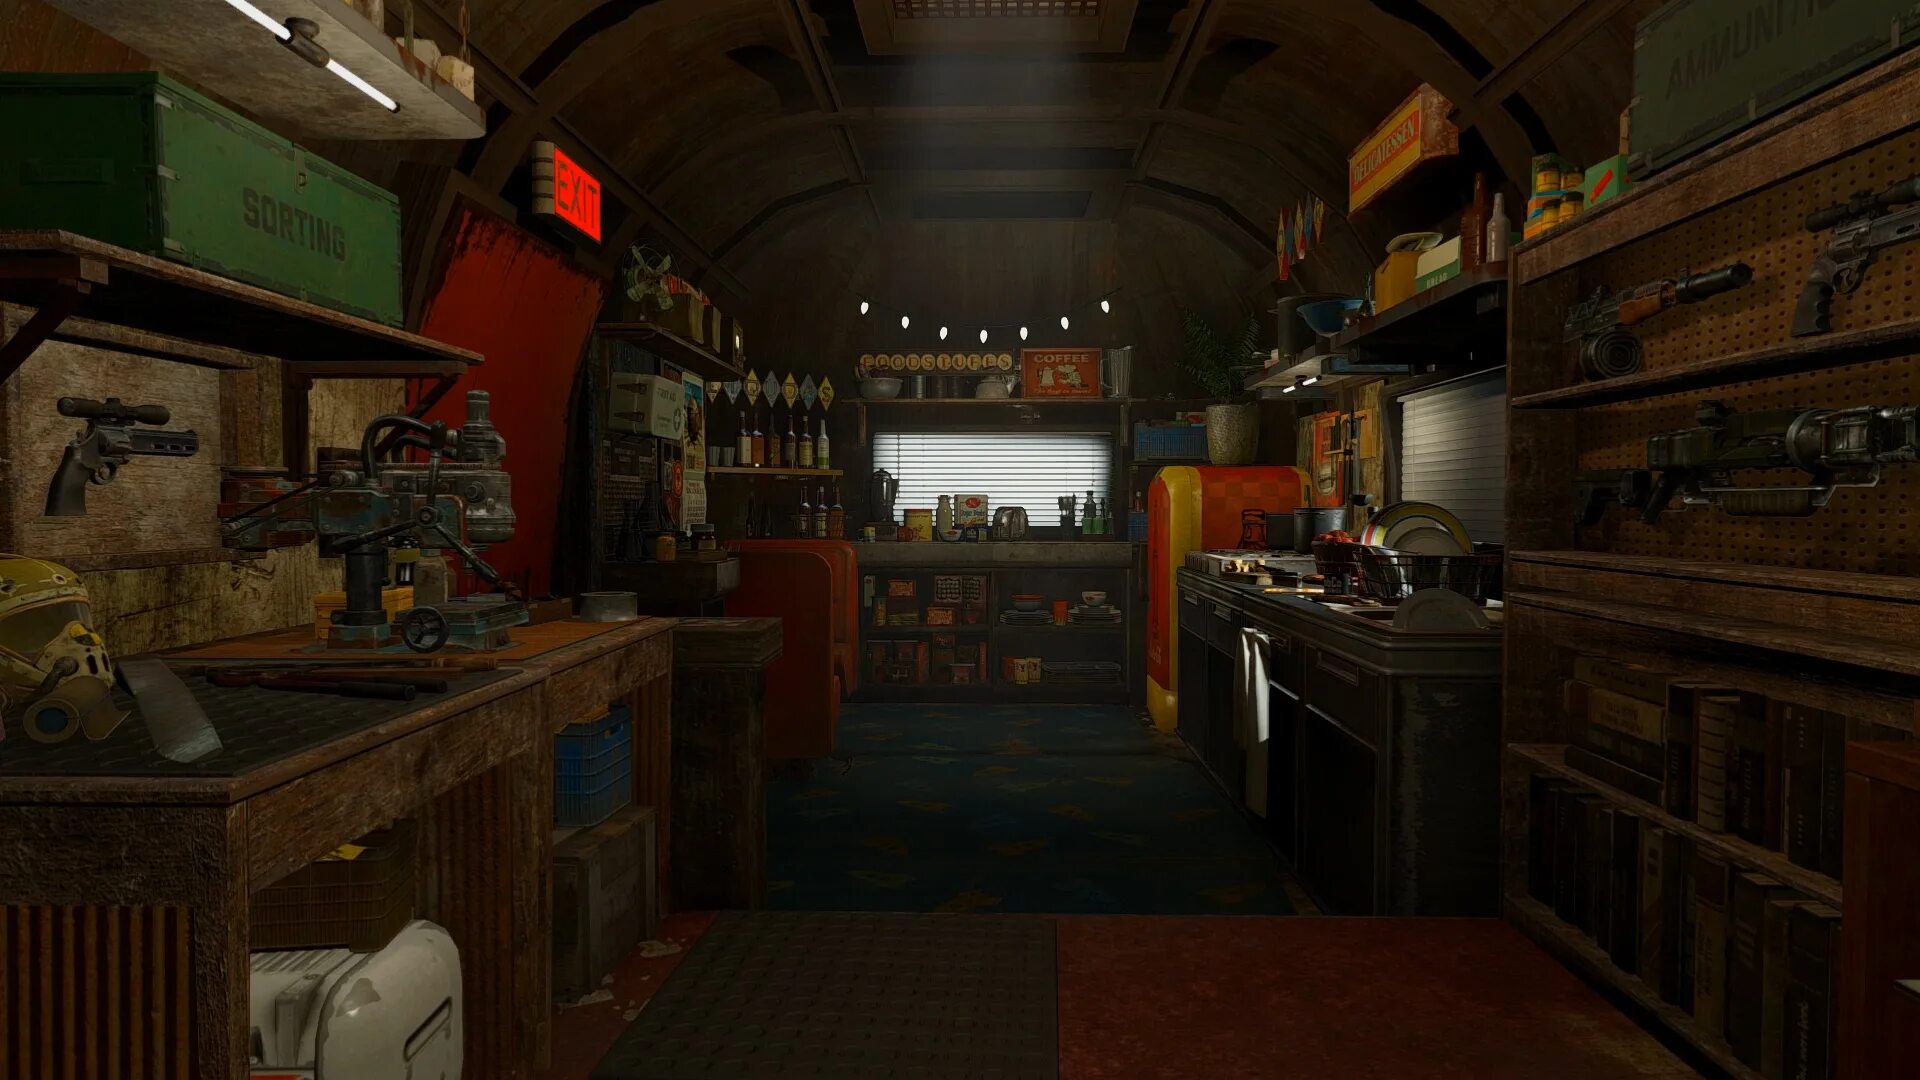 Player housing. Фоллаут 4 интерьер. Сомервилл Плейс Fallout 4. Фоллаут 4 дом. Fallout 4 дом игрока.